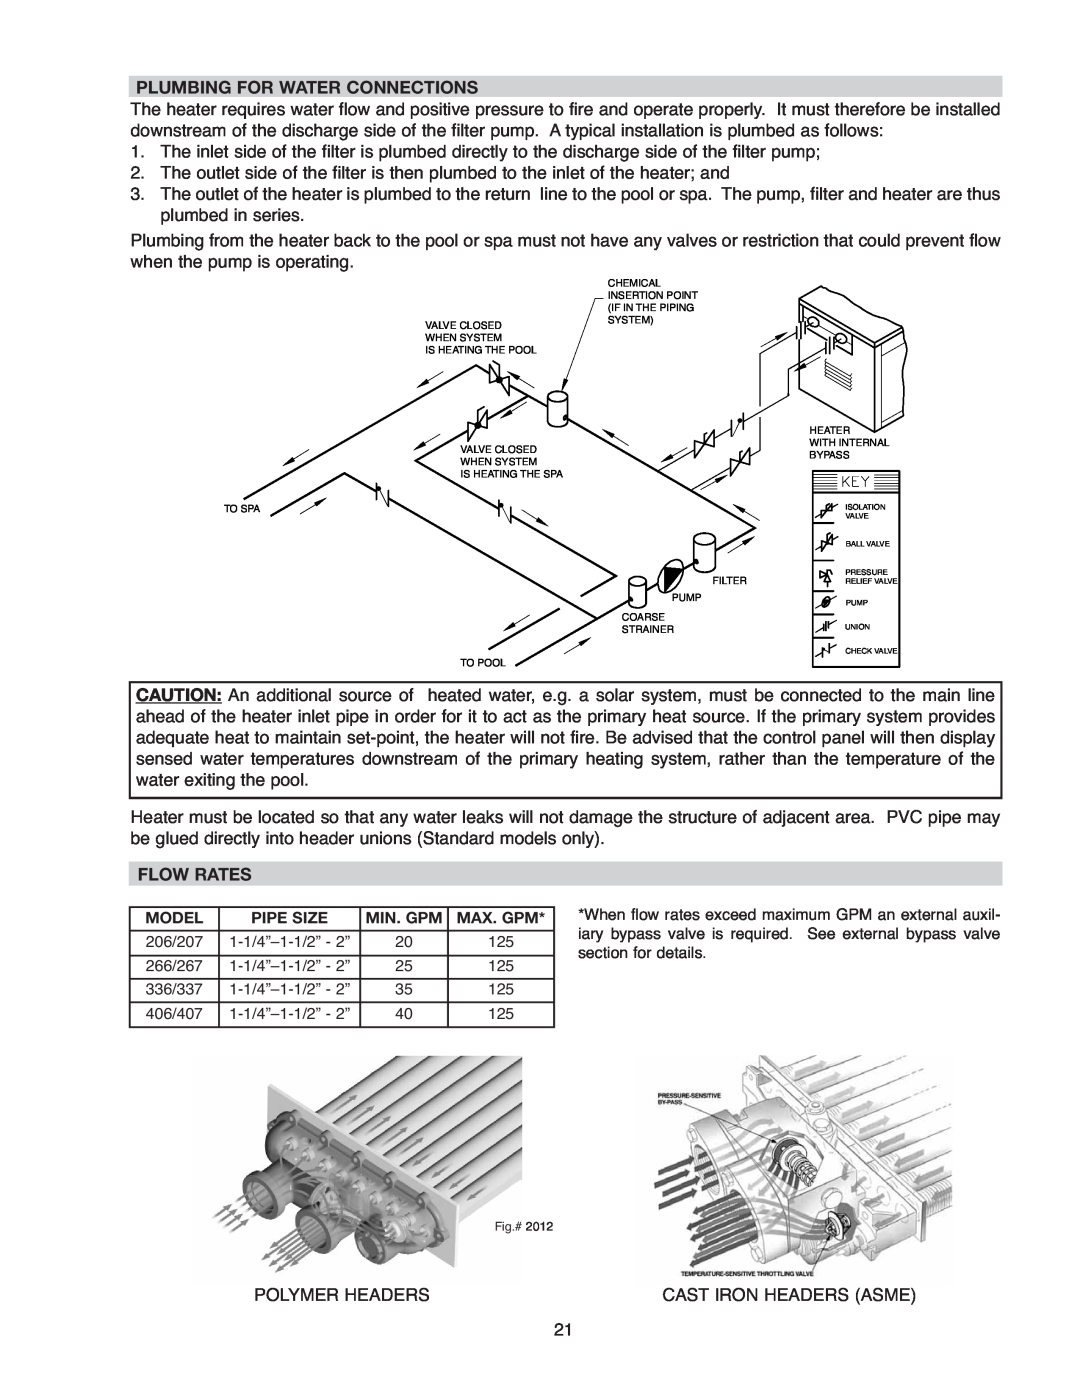 Raypak 207A, 406A, 206A, 407A, 337A, 336A, 267A, 266A operating instructions Plumbing For Water Connections, Flow Rates 